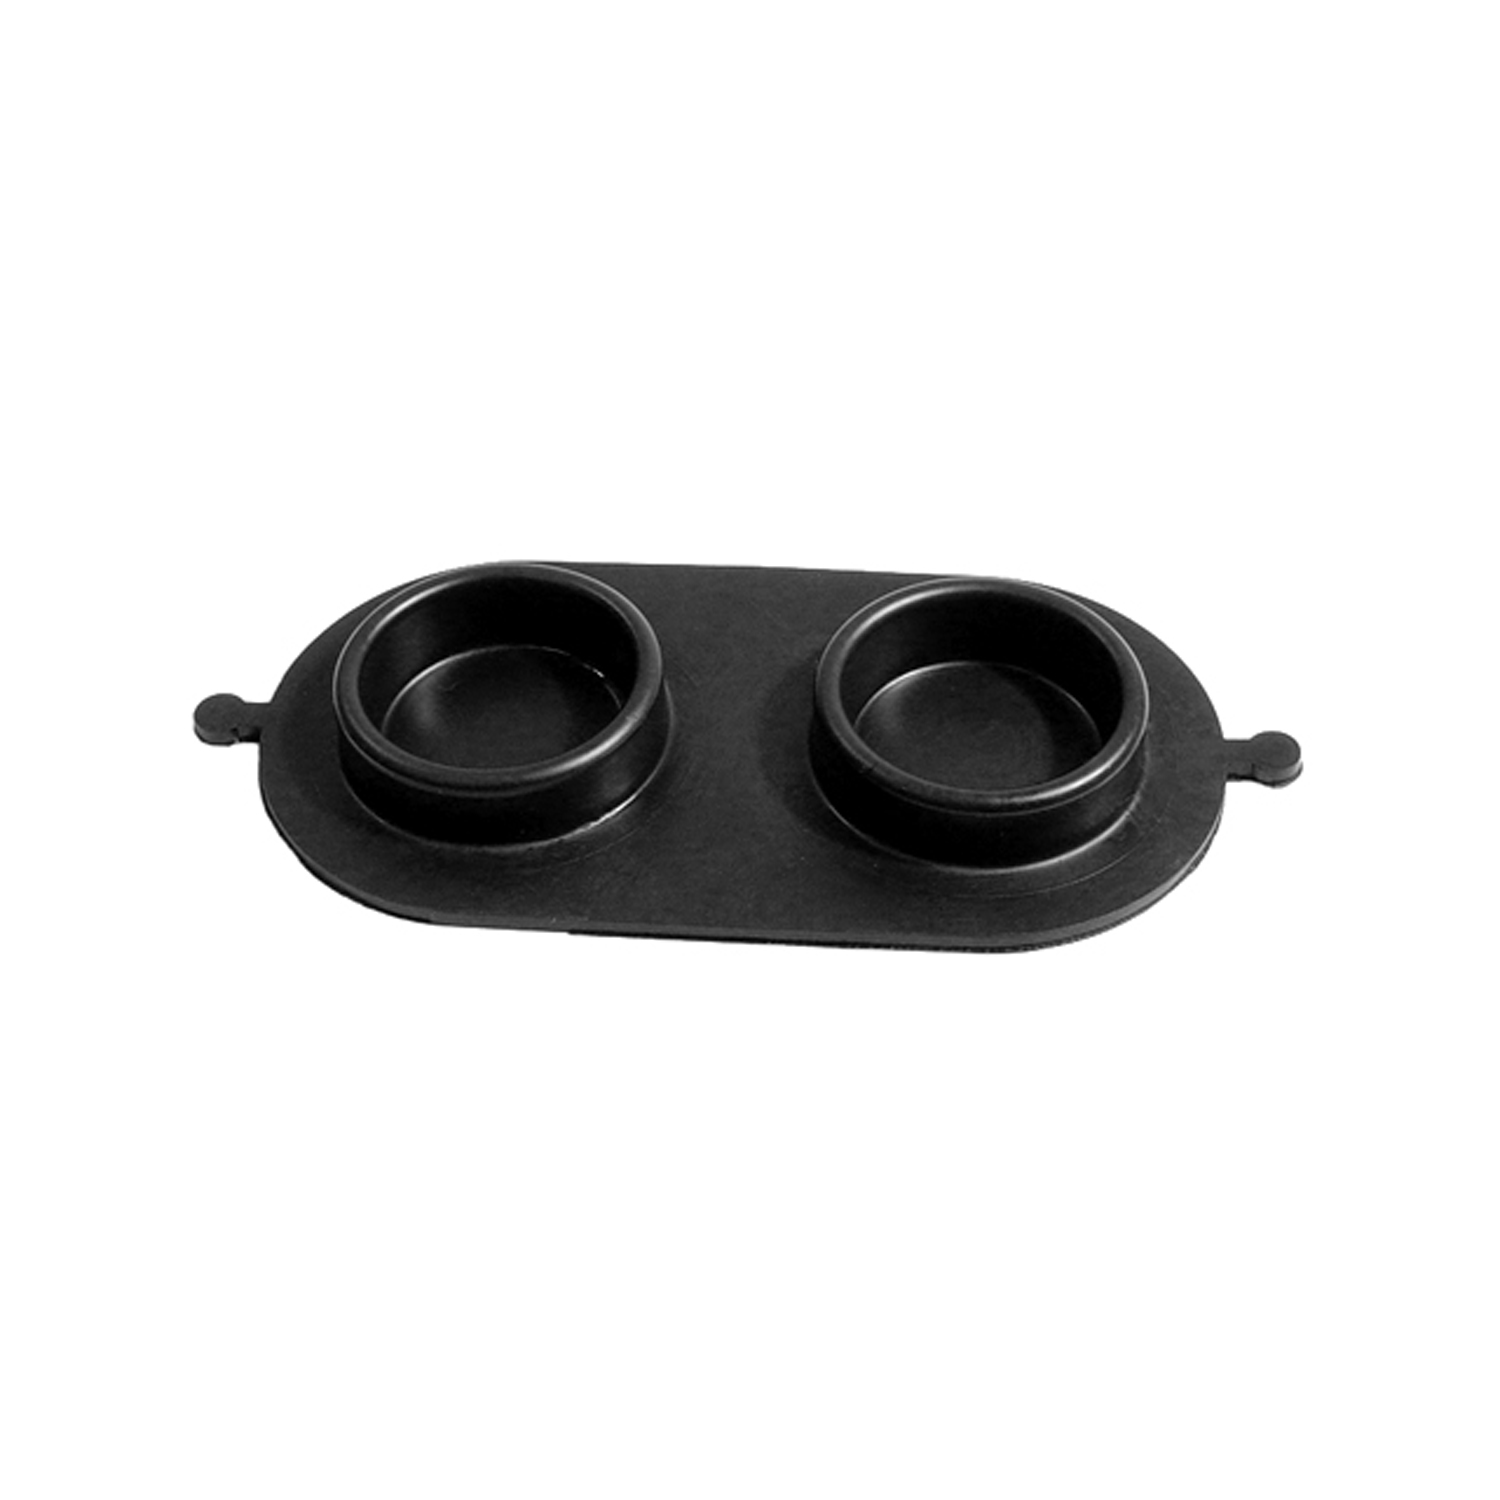 1969 Ford Thunderbird Brake Master Cylinder Cover Seal.  Replaces OEM #C7AZ2167-A-RP 2-B